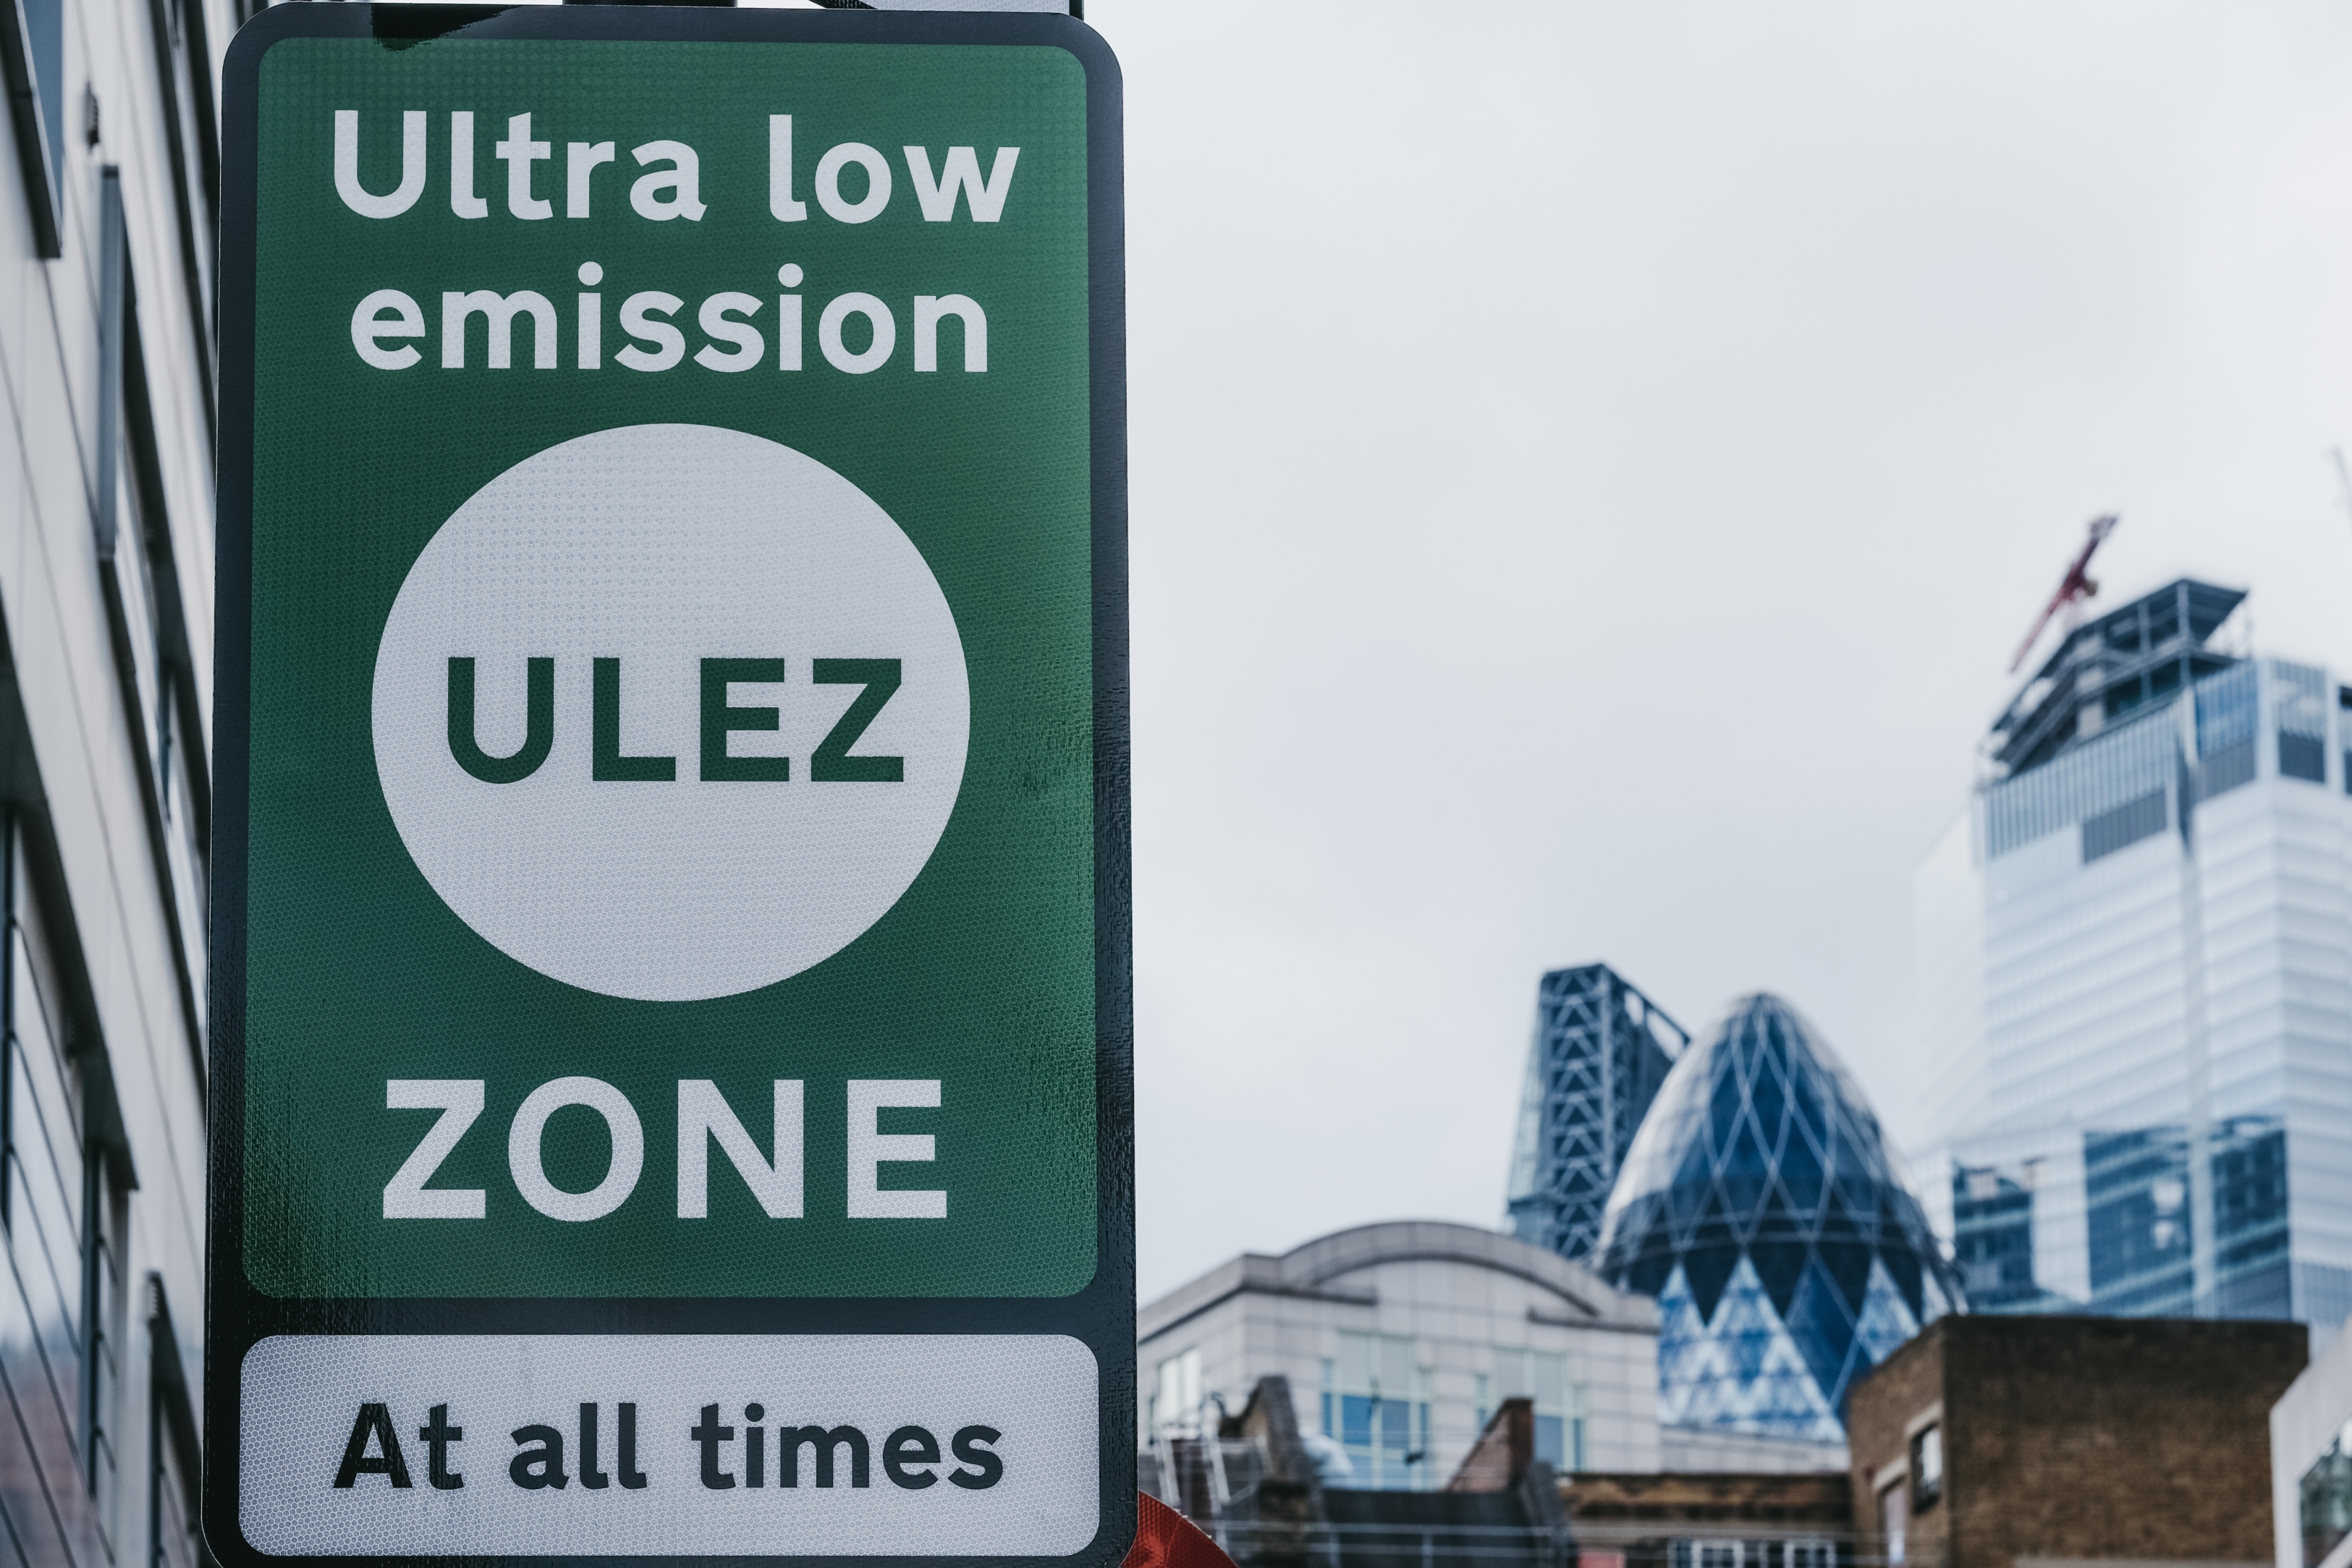 London ULEZ is expanding - Sign indicating Ultra Low Emission Zone (ULEZ) on a street in London, UK